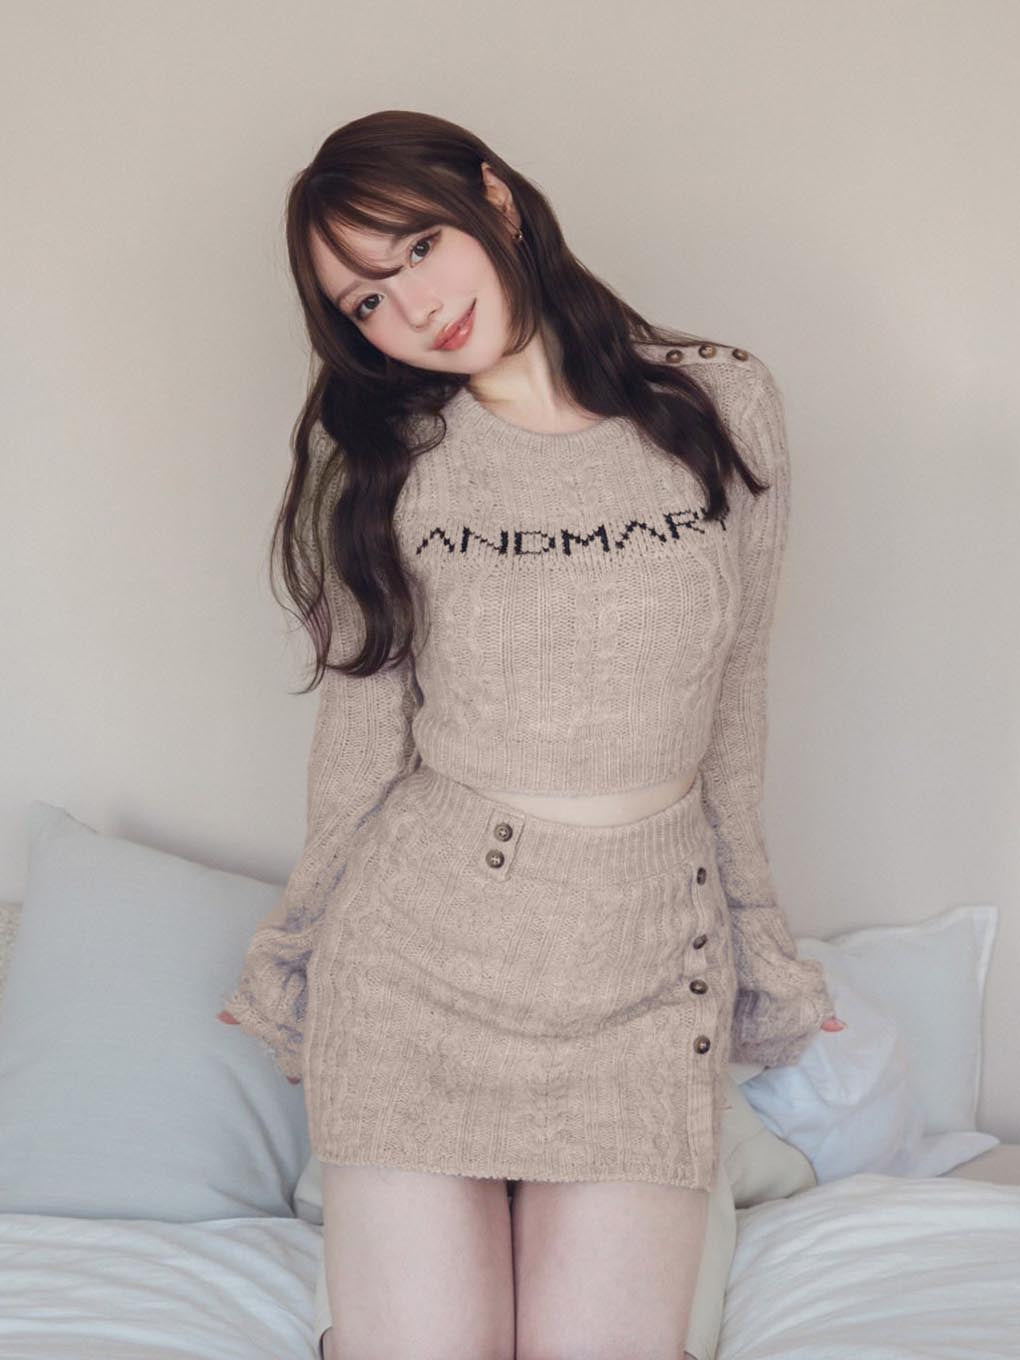 ANDMARY Marie knit set up ベージュ初コメ失礼致します